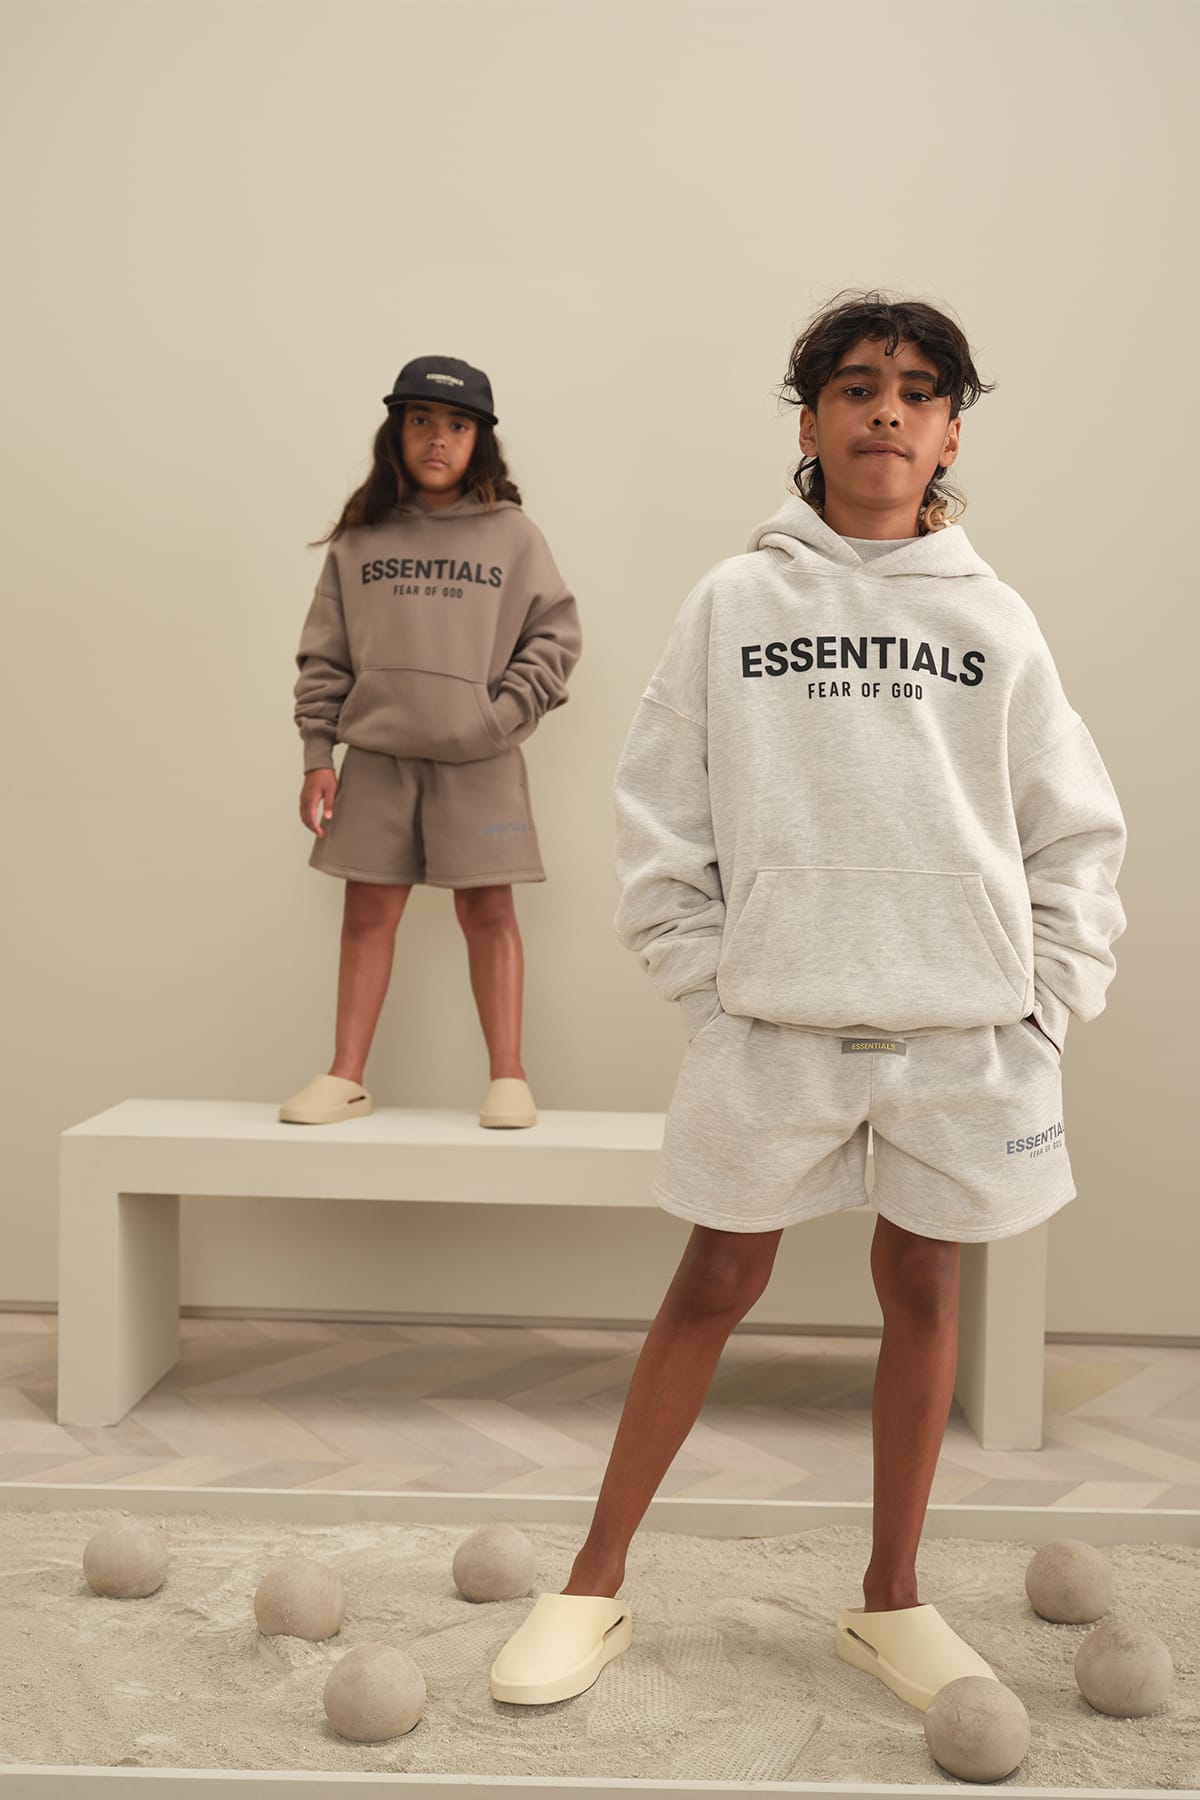 There's Another Huge Fear of God Essentials Drop at Nordstrom (And